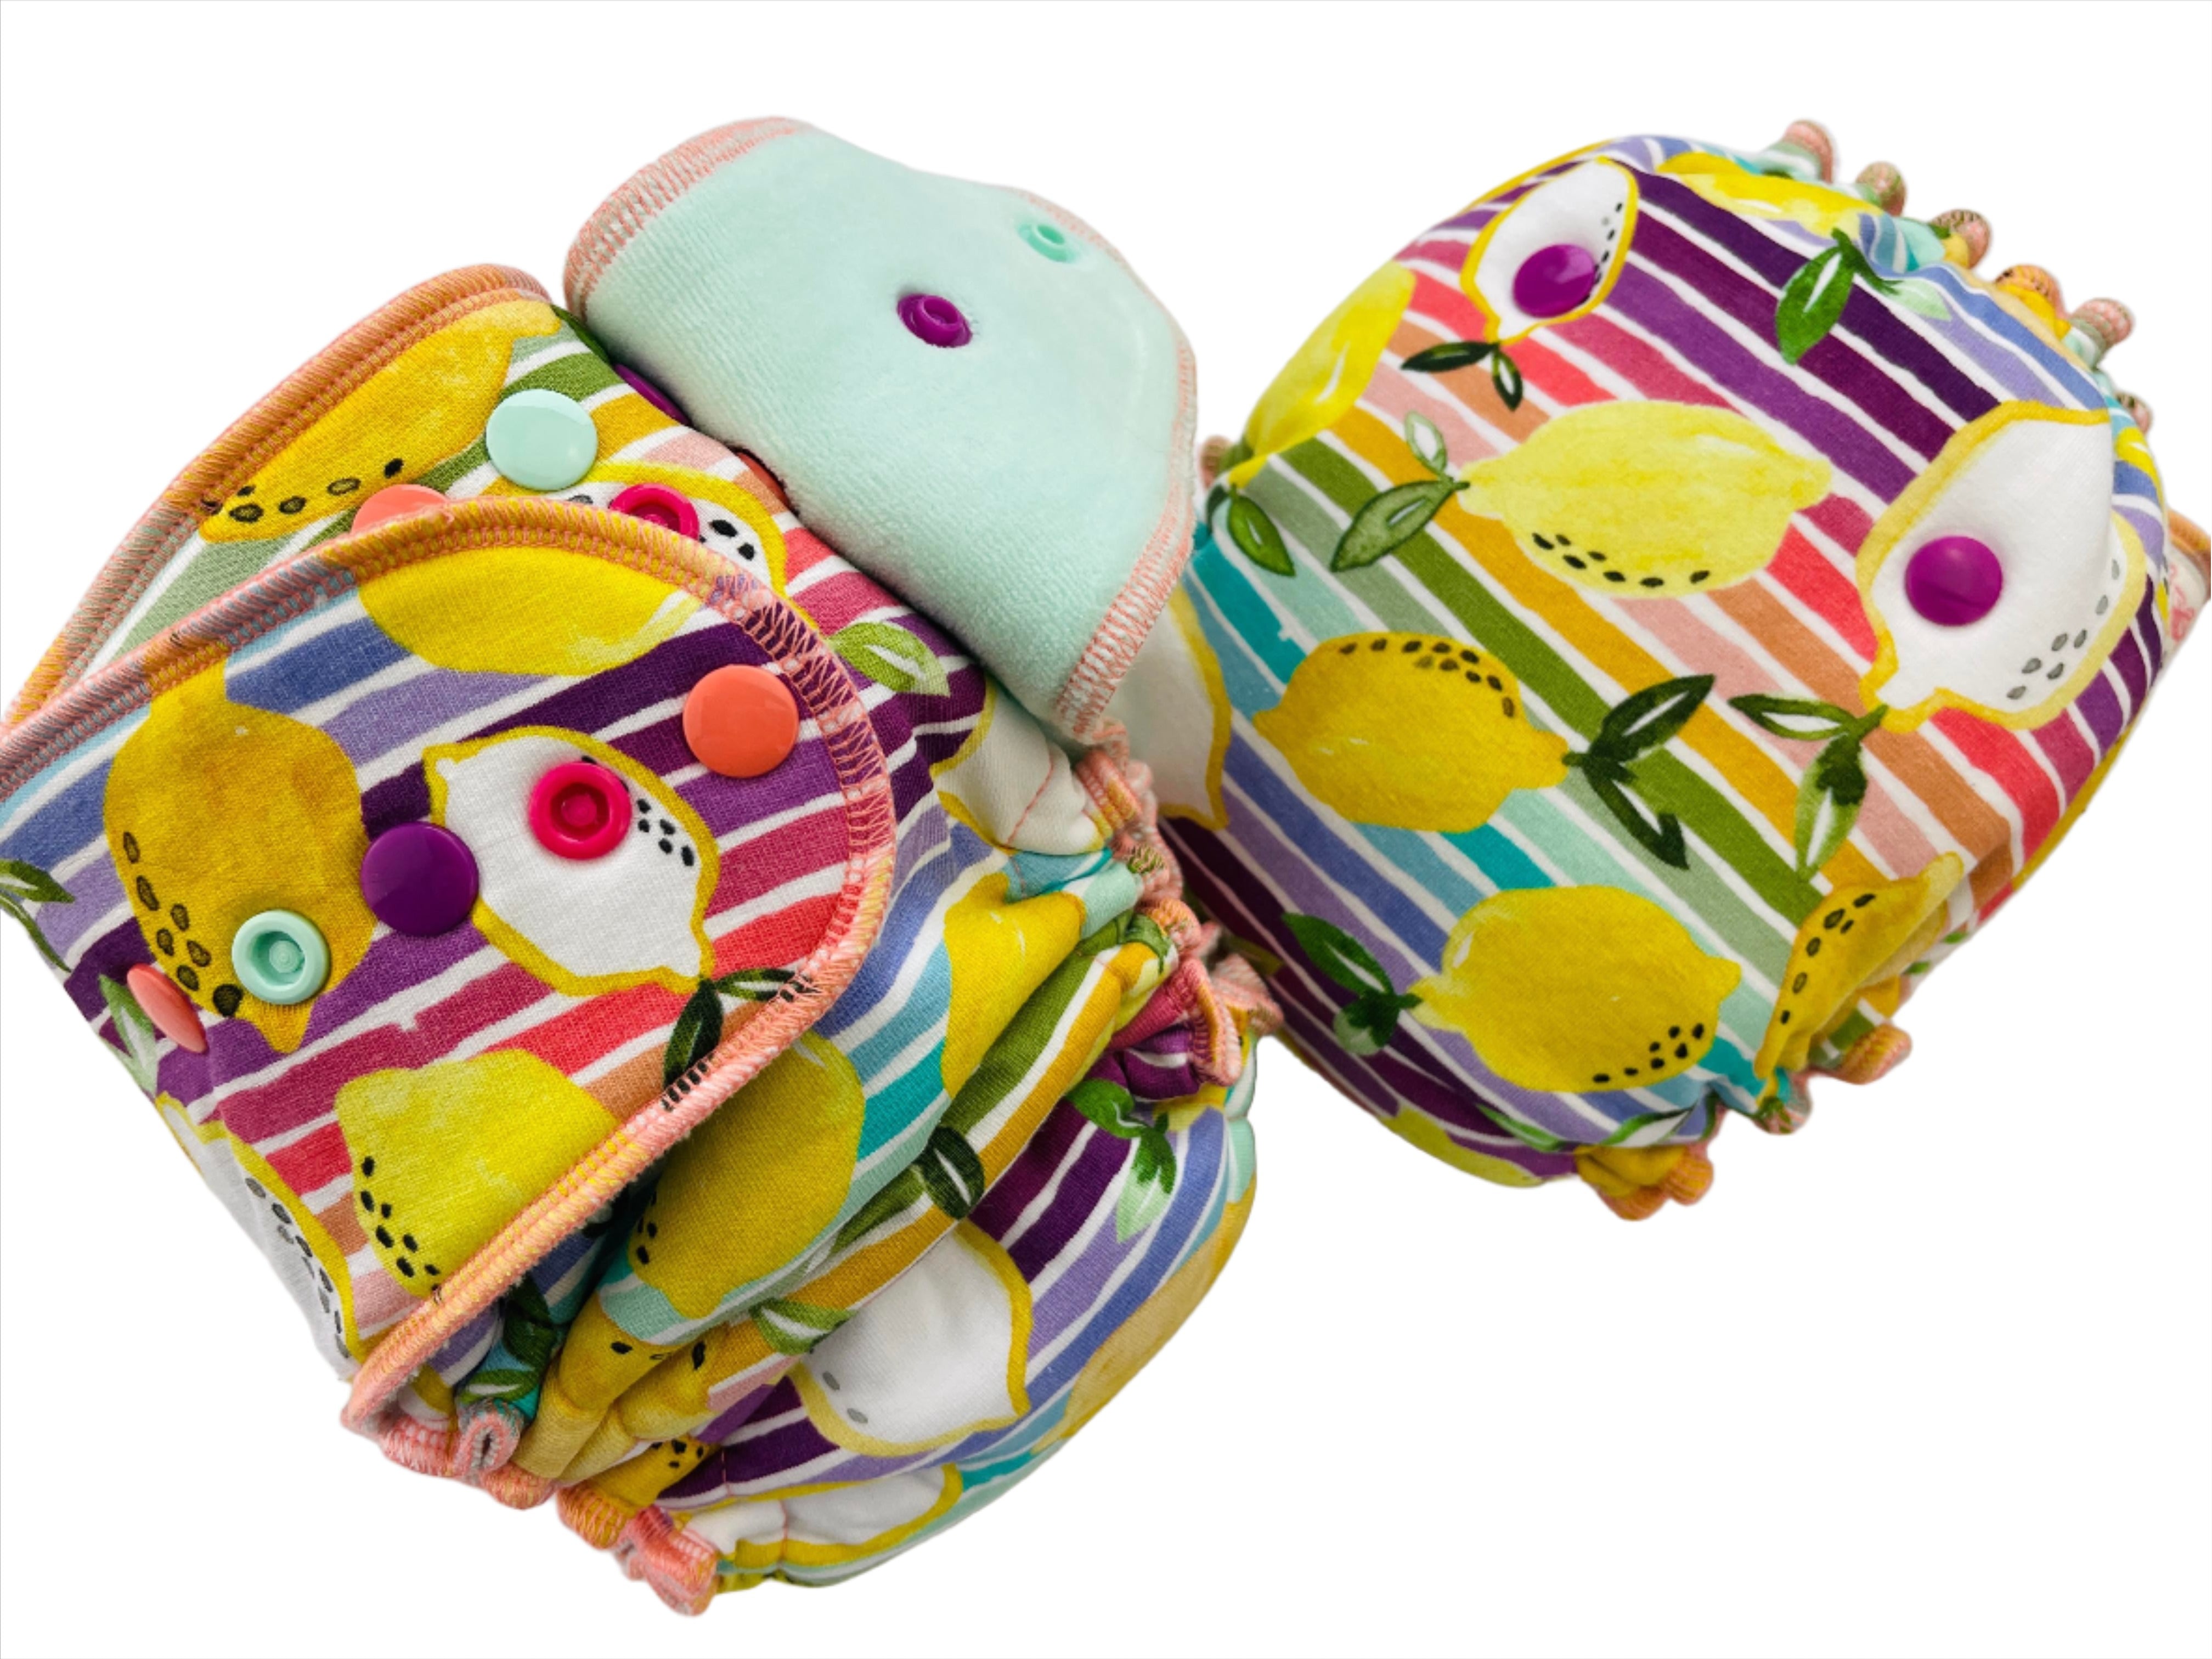 Lilly & Frank One Size Cloth Diaper Rainbow Lemons One Size Cloth Diaper - Fitted - Serged